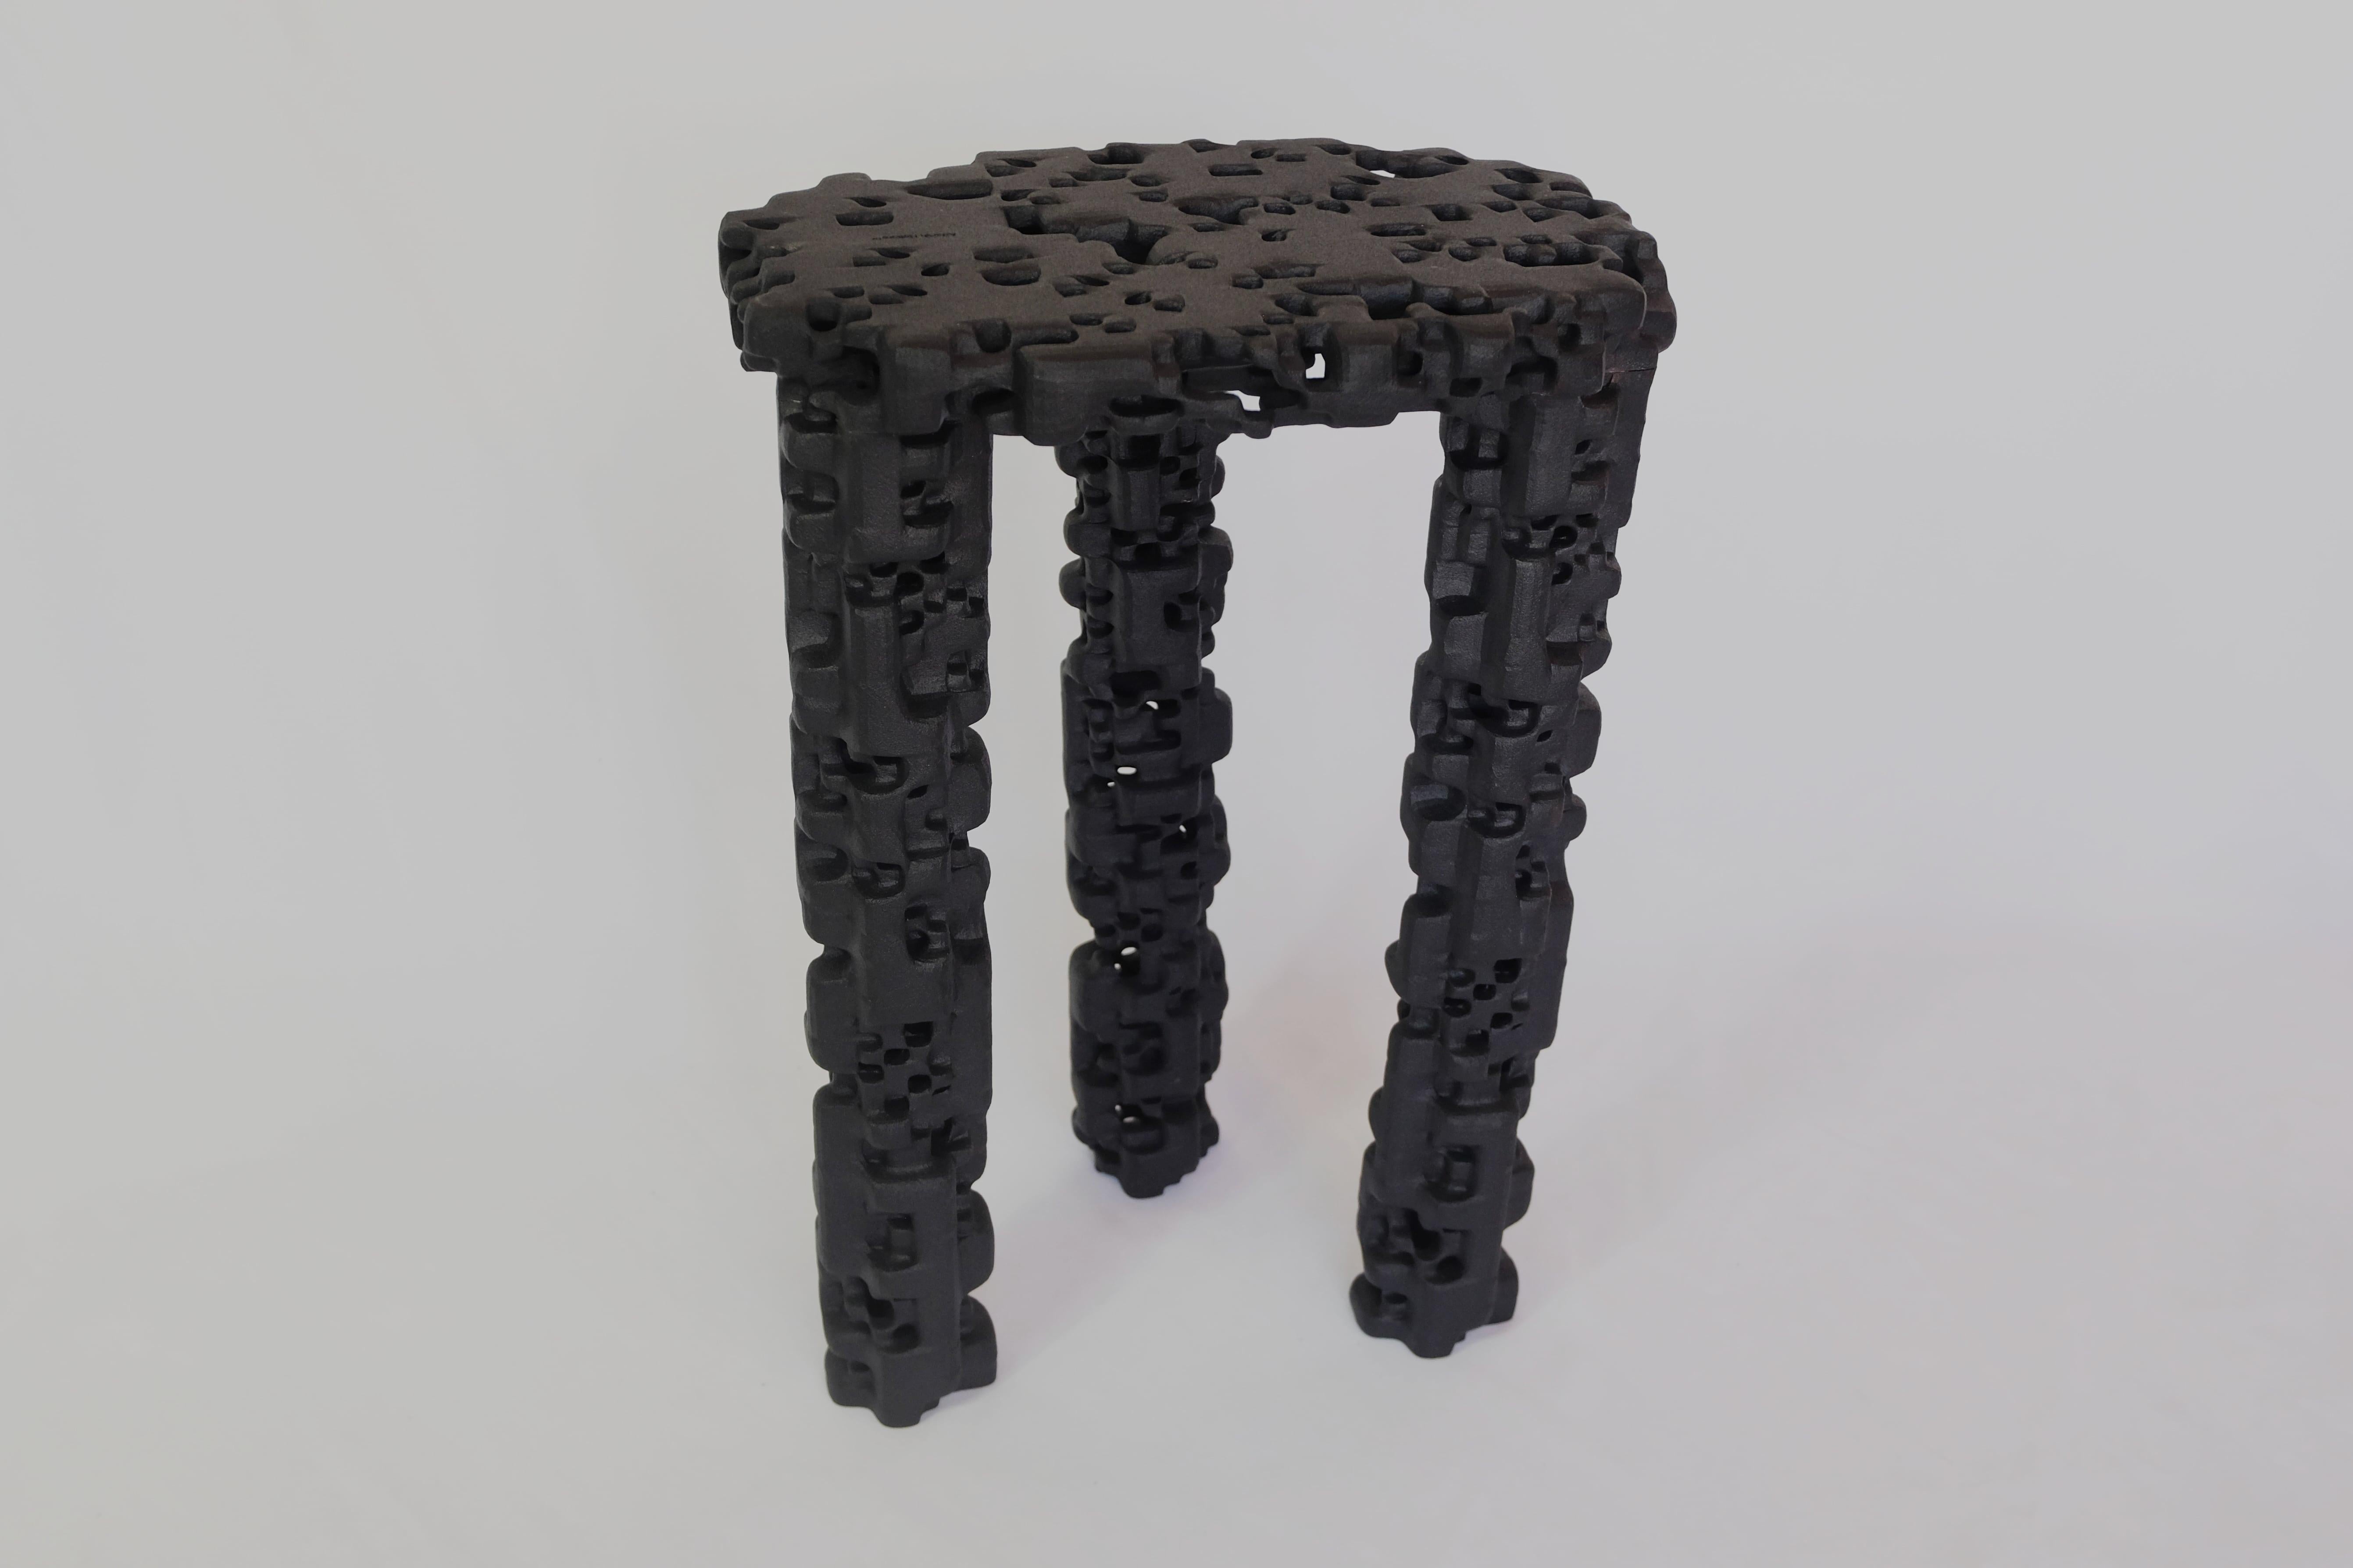 This side table was first created digitally with generative algorithms and photogrammetry and then fabricated with recycled Nylon PA 12 powder and SLS, or selective laser sintering. The smoothing and finishing process was done by Polyshot Surfacing,